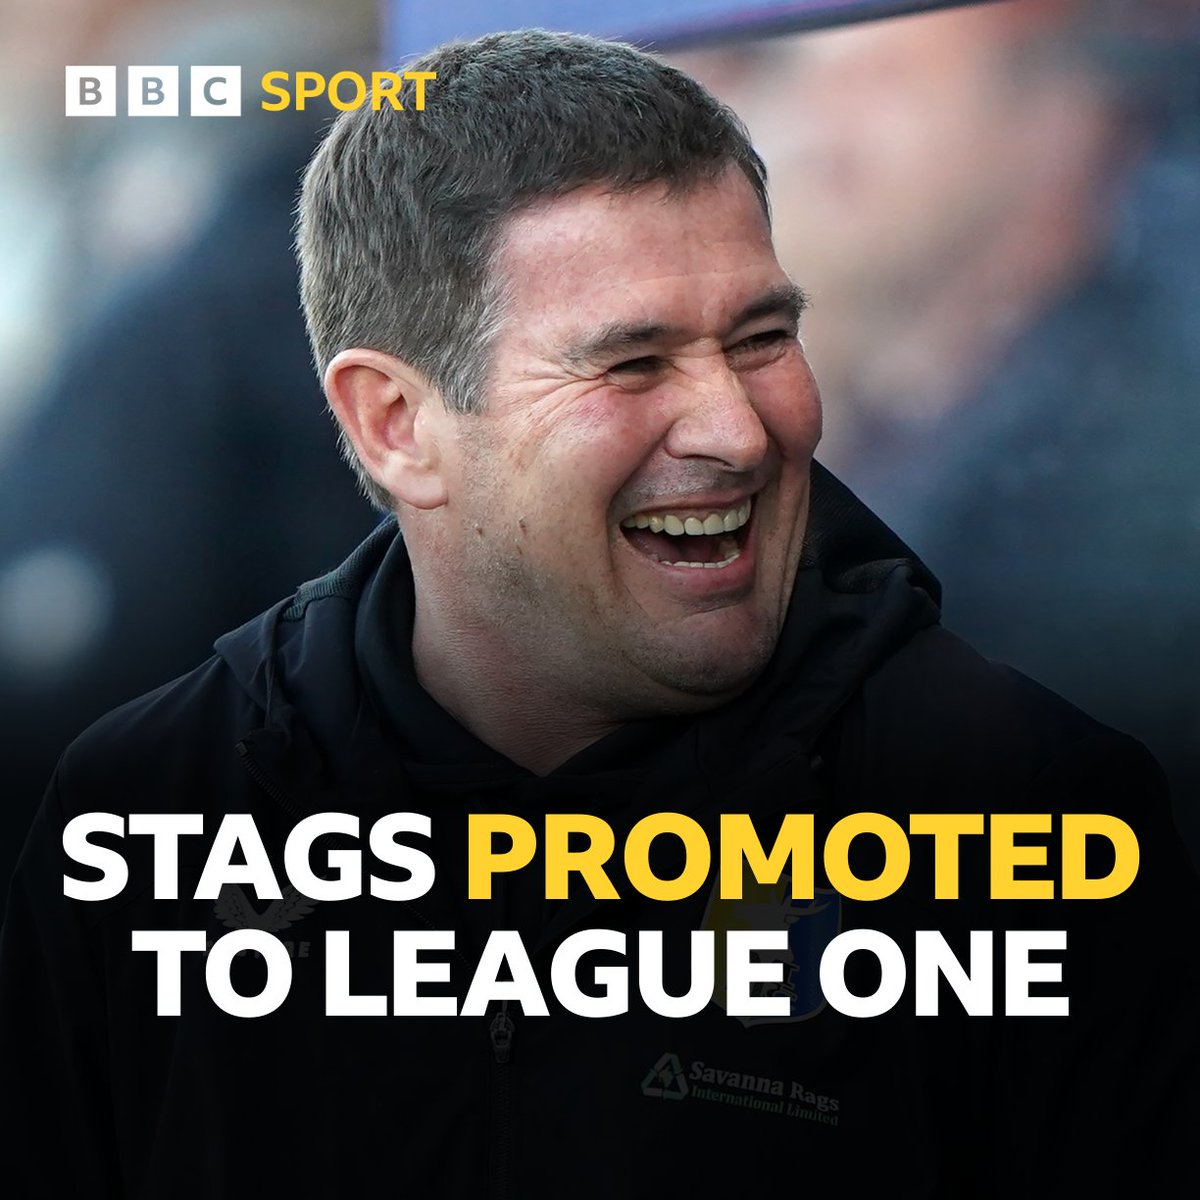 Mansfield Town have beaten Accrington Stanley by two goals to one, and as such #Stags will play in the third tier next season for the first time since 2003.